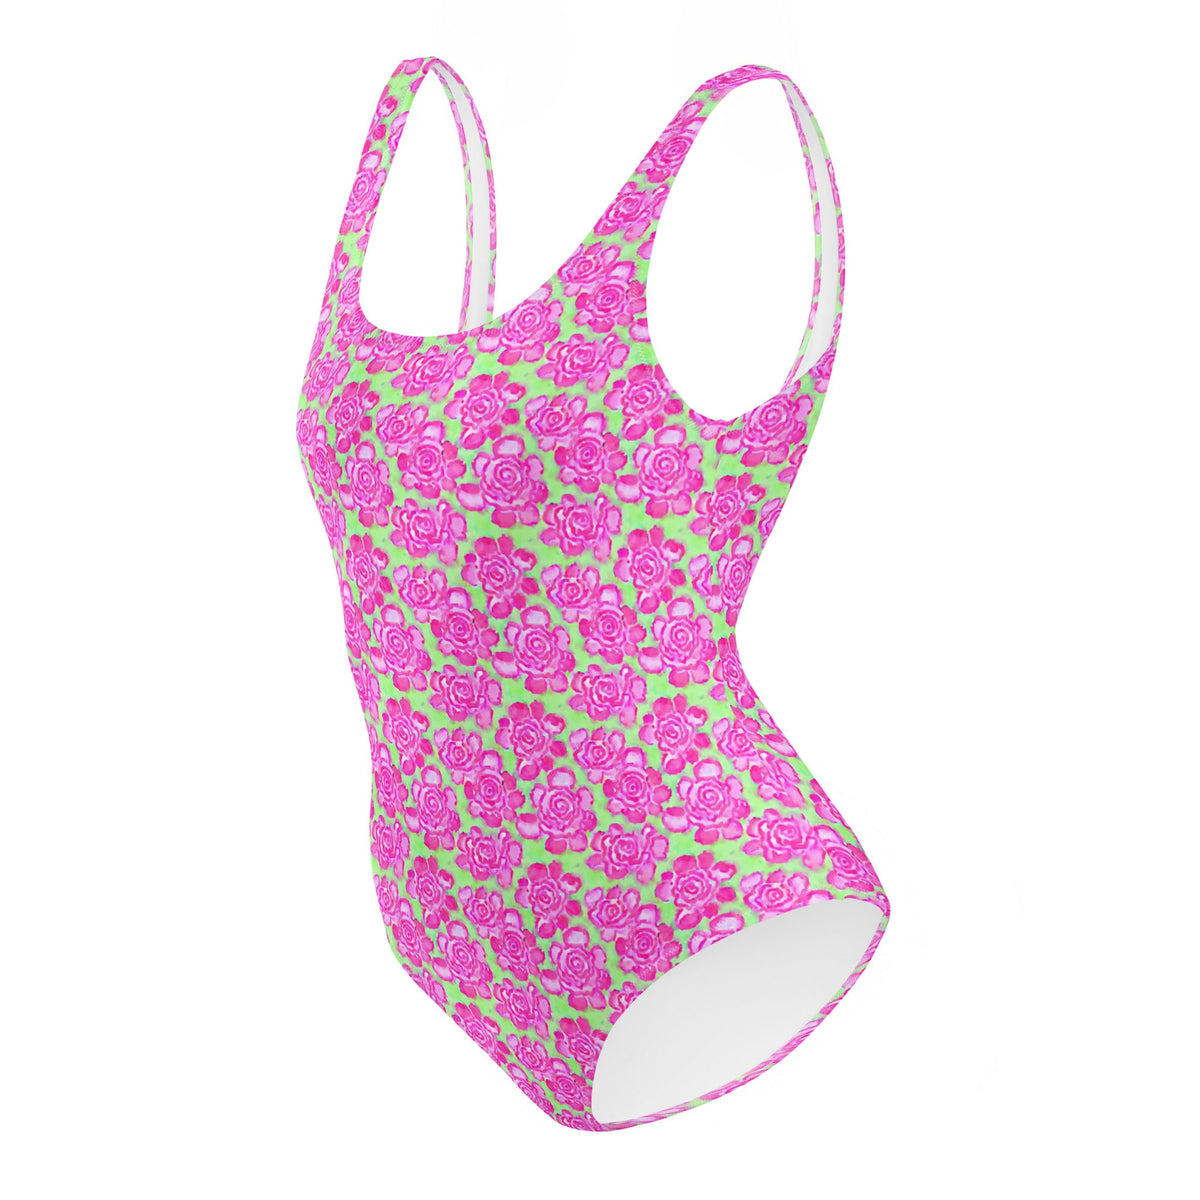 FLORIDA ECO ONE PIECE SWIMSUIT - PINKLIMA BLOOMS